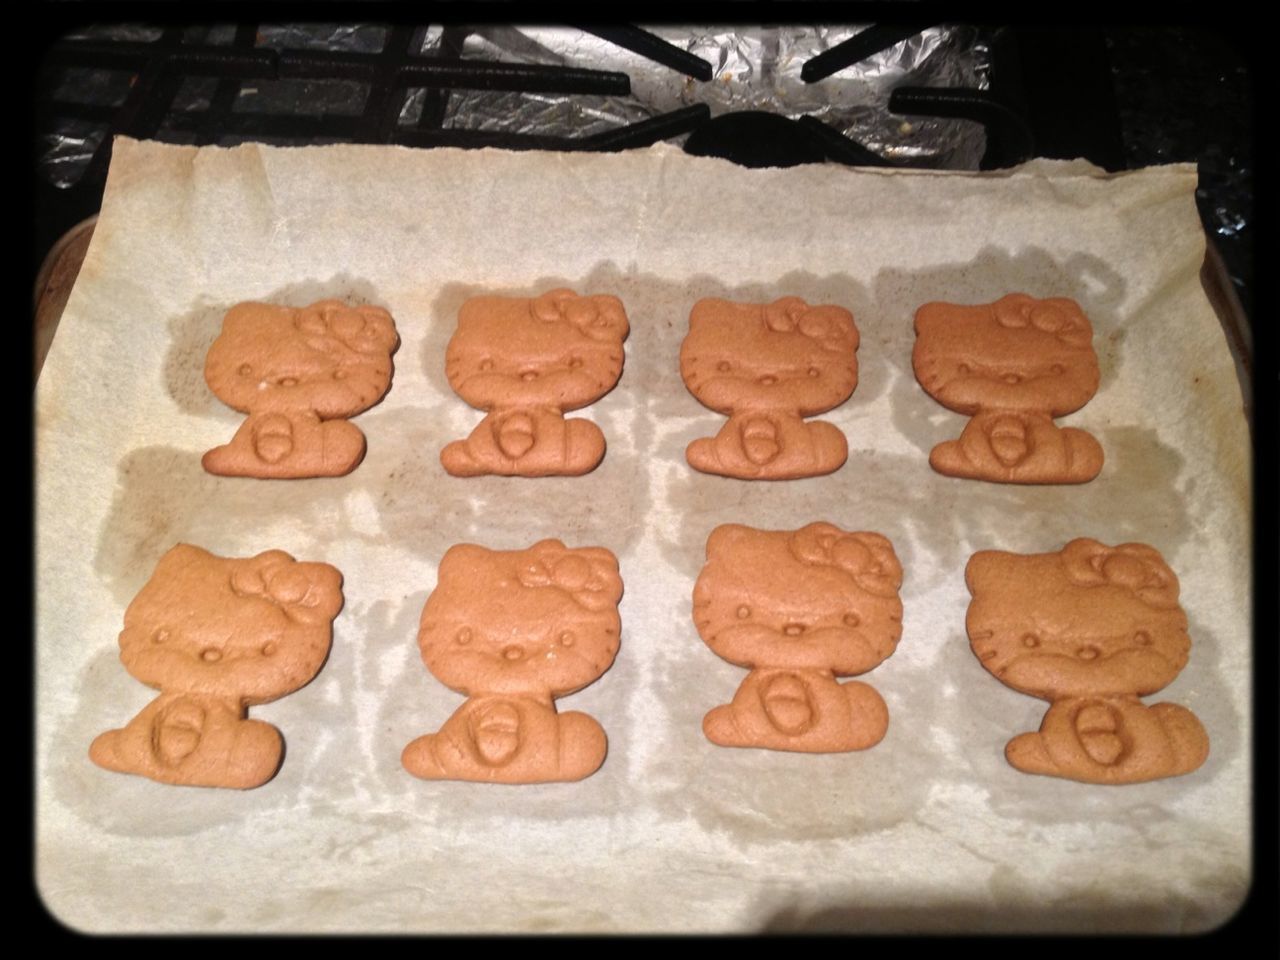 More hello kitty gingerbread cookies...